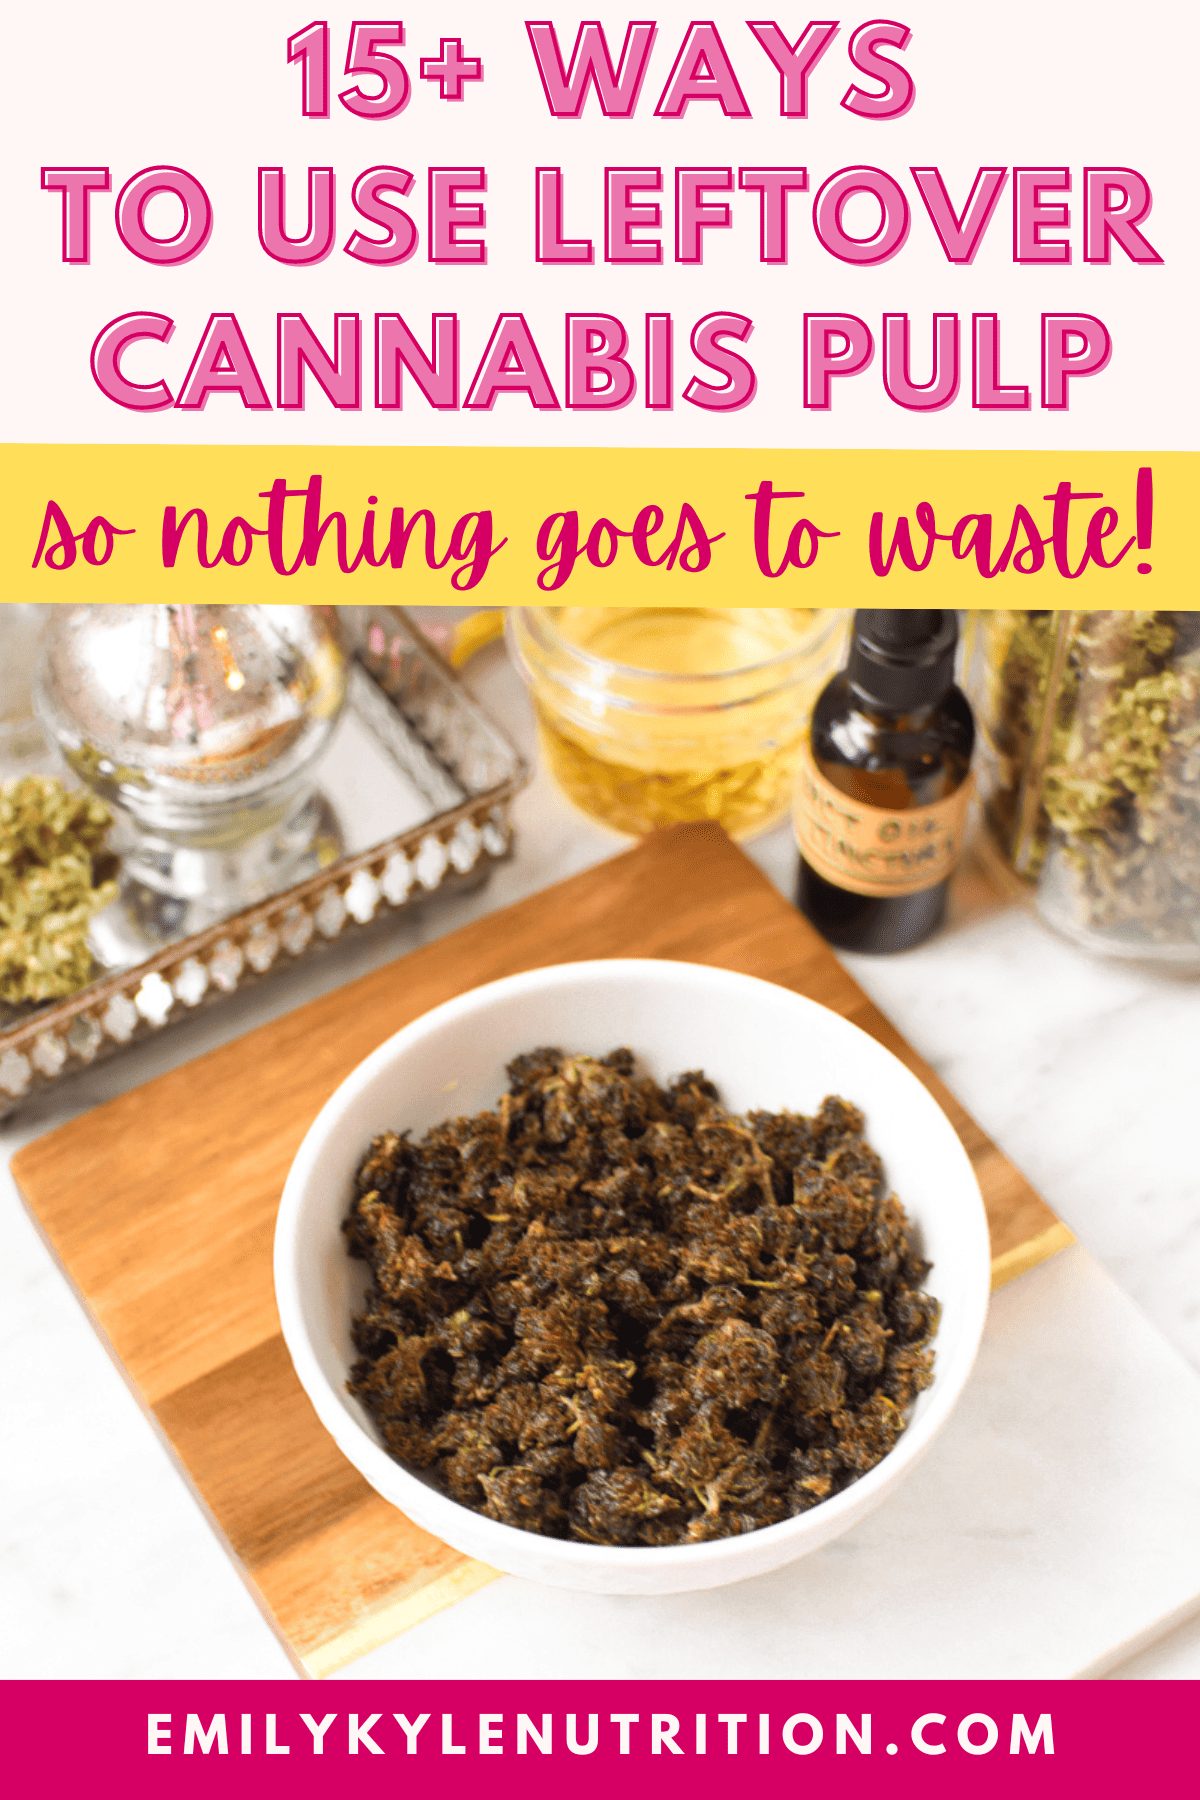 A pinterest pin that says 15+ Ways to Use Leftover Cannabis Pulp.